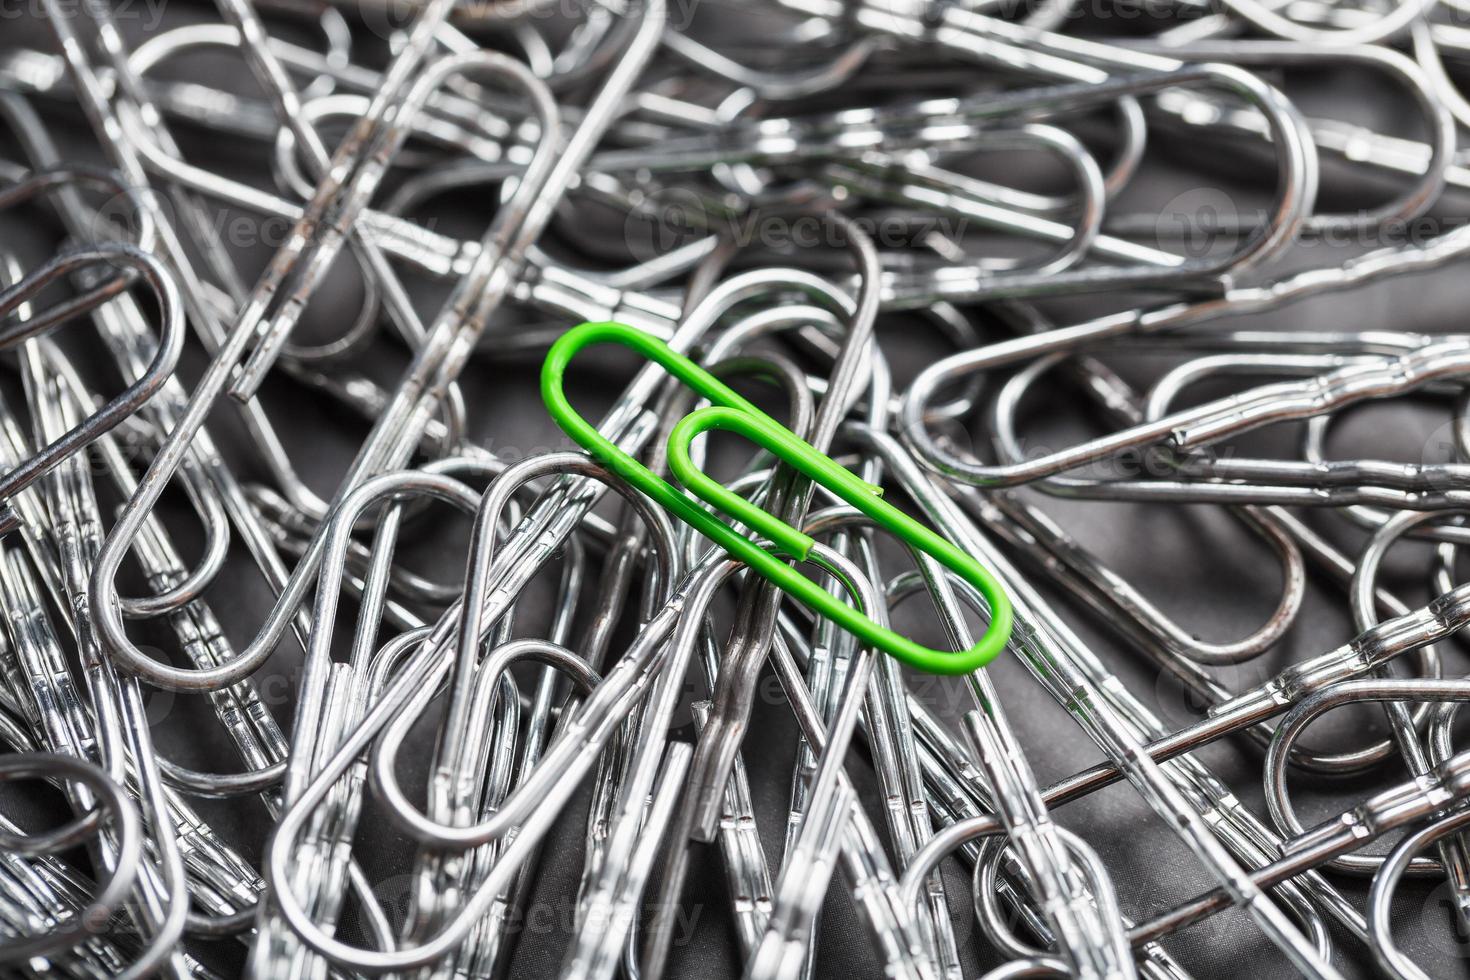 The green paper clip stands out against a textured background of silver paper clips photo